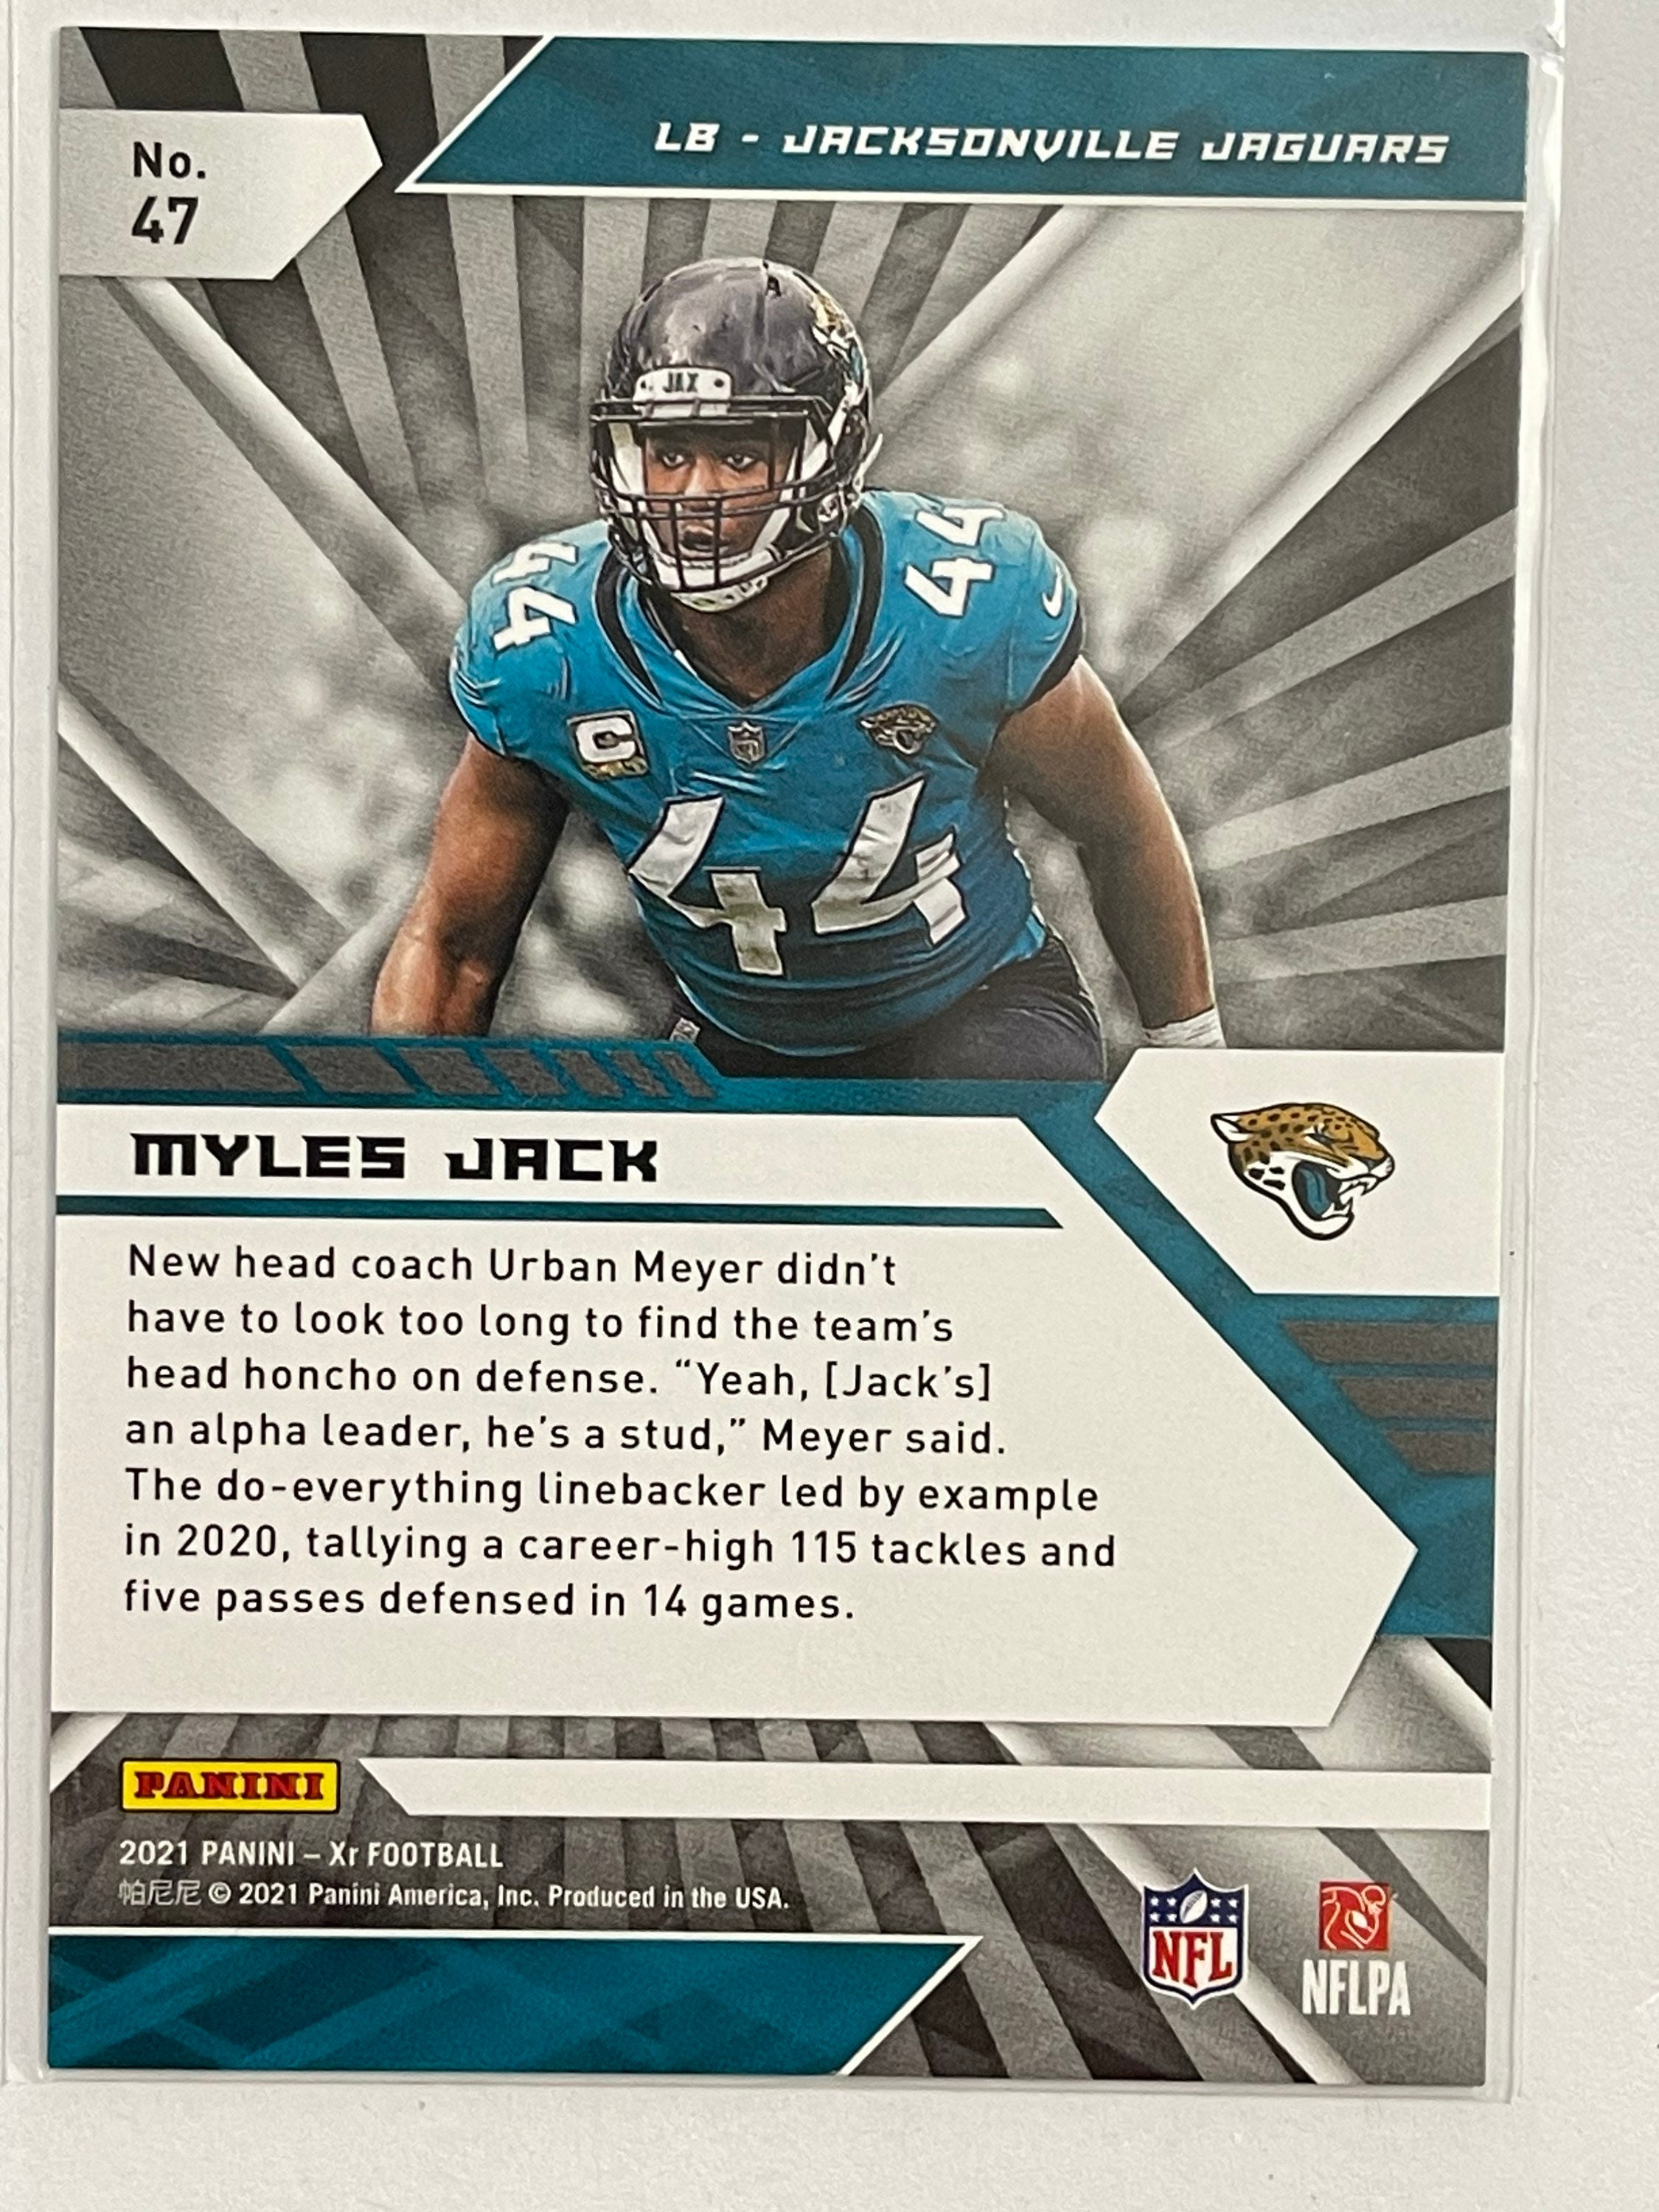 Myles Jack named Jaguars' Nominee for NFL's 2021 Walter Payton Man of the  Year award